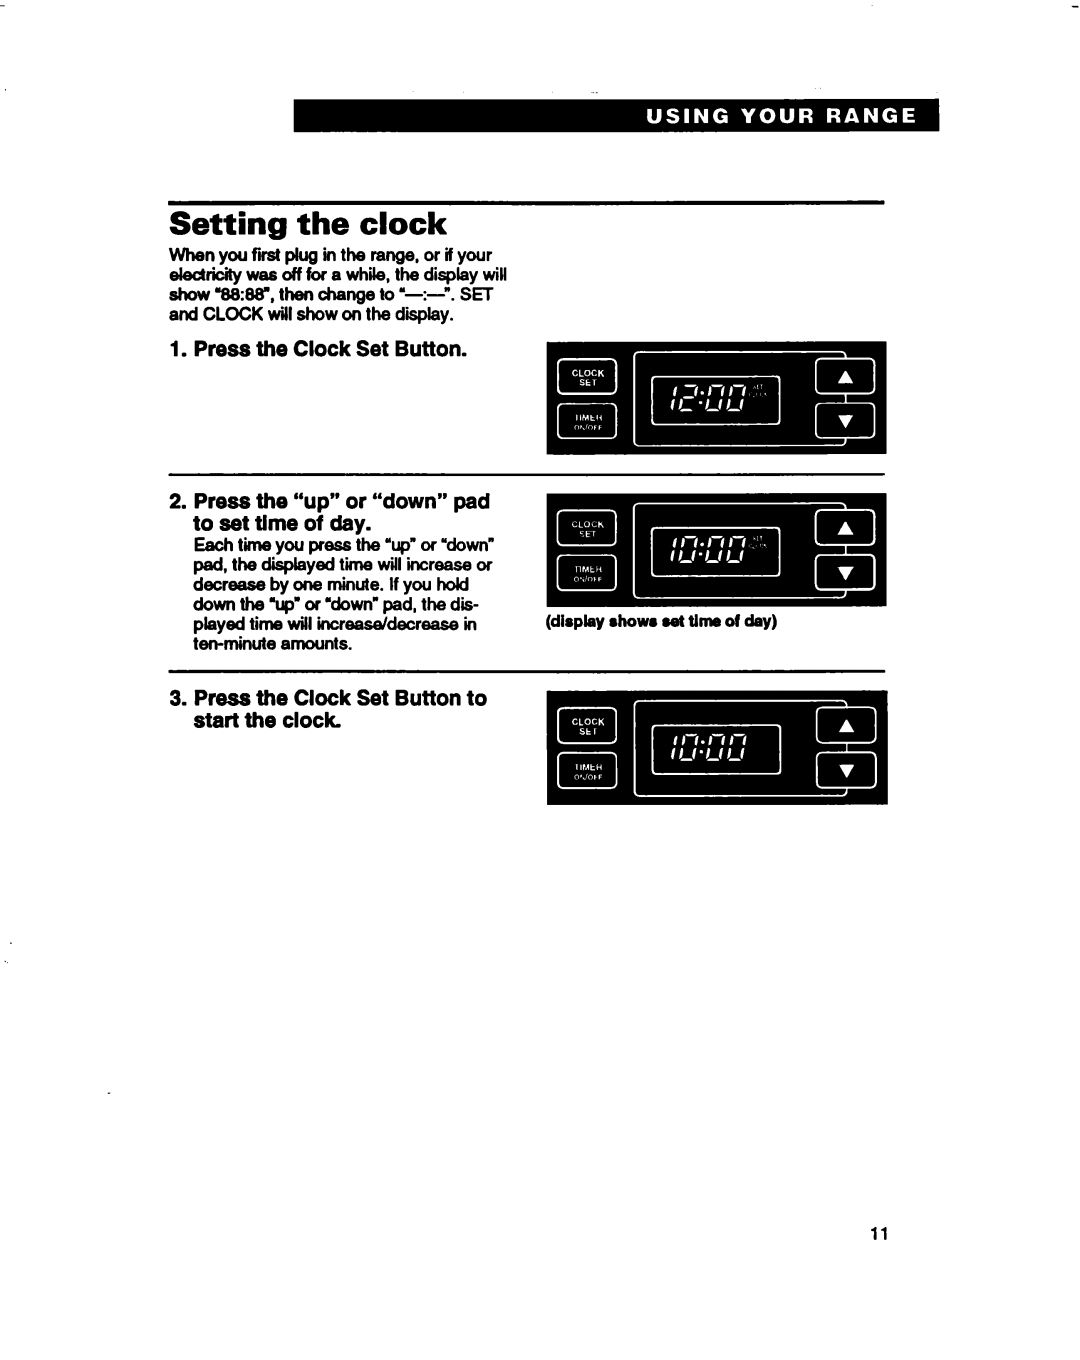 Whirlpool RF330PXD warranty Setting the clock, Press the Clock Set Button, Press the “up” or “down” pad to set time of day 